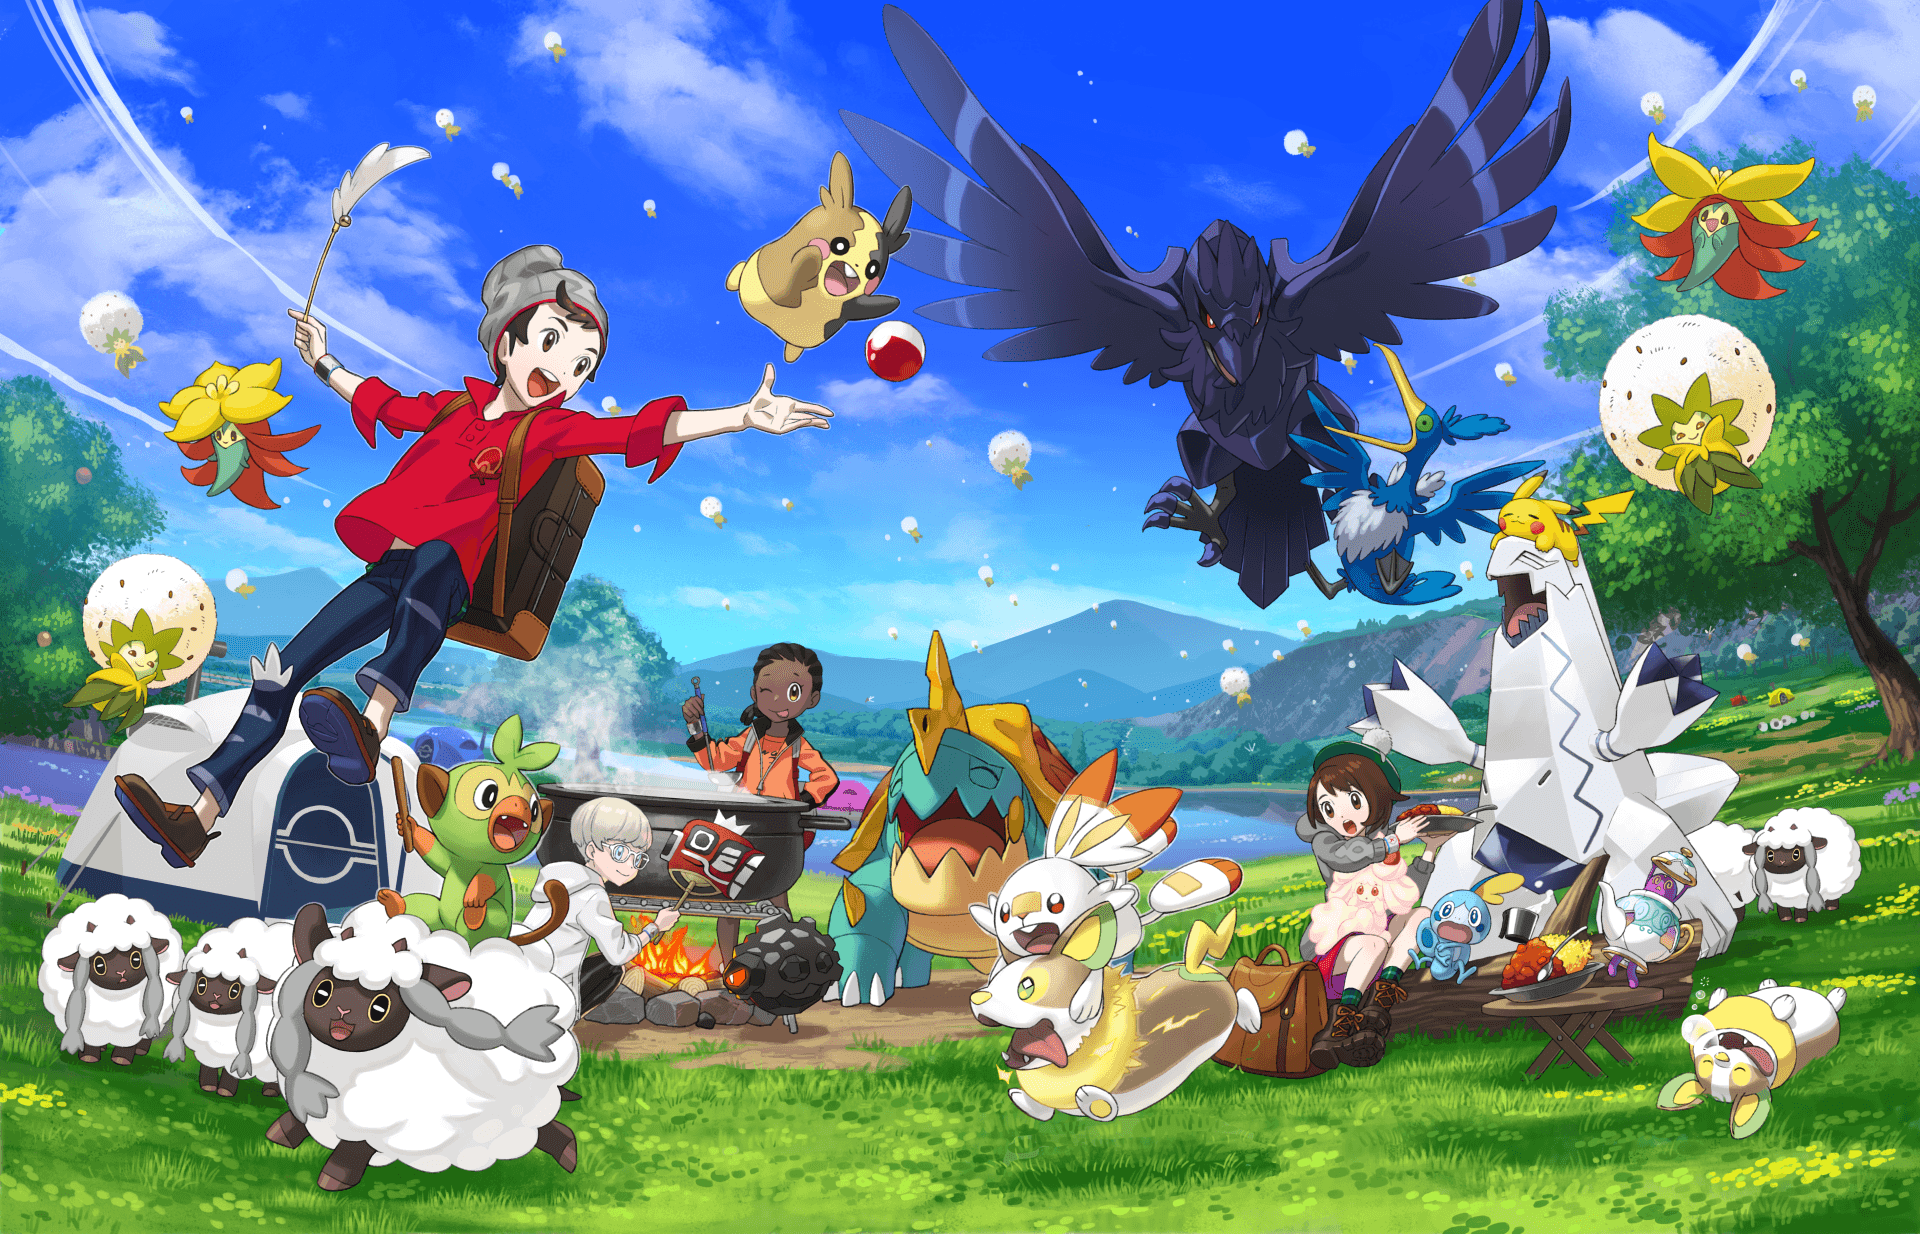 Pokemon Sword Shield Game Wallpapers Wallpaper Cave Images, Photos, Reviews